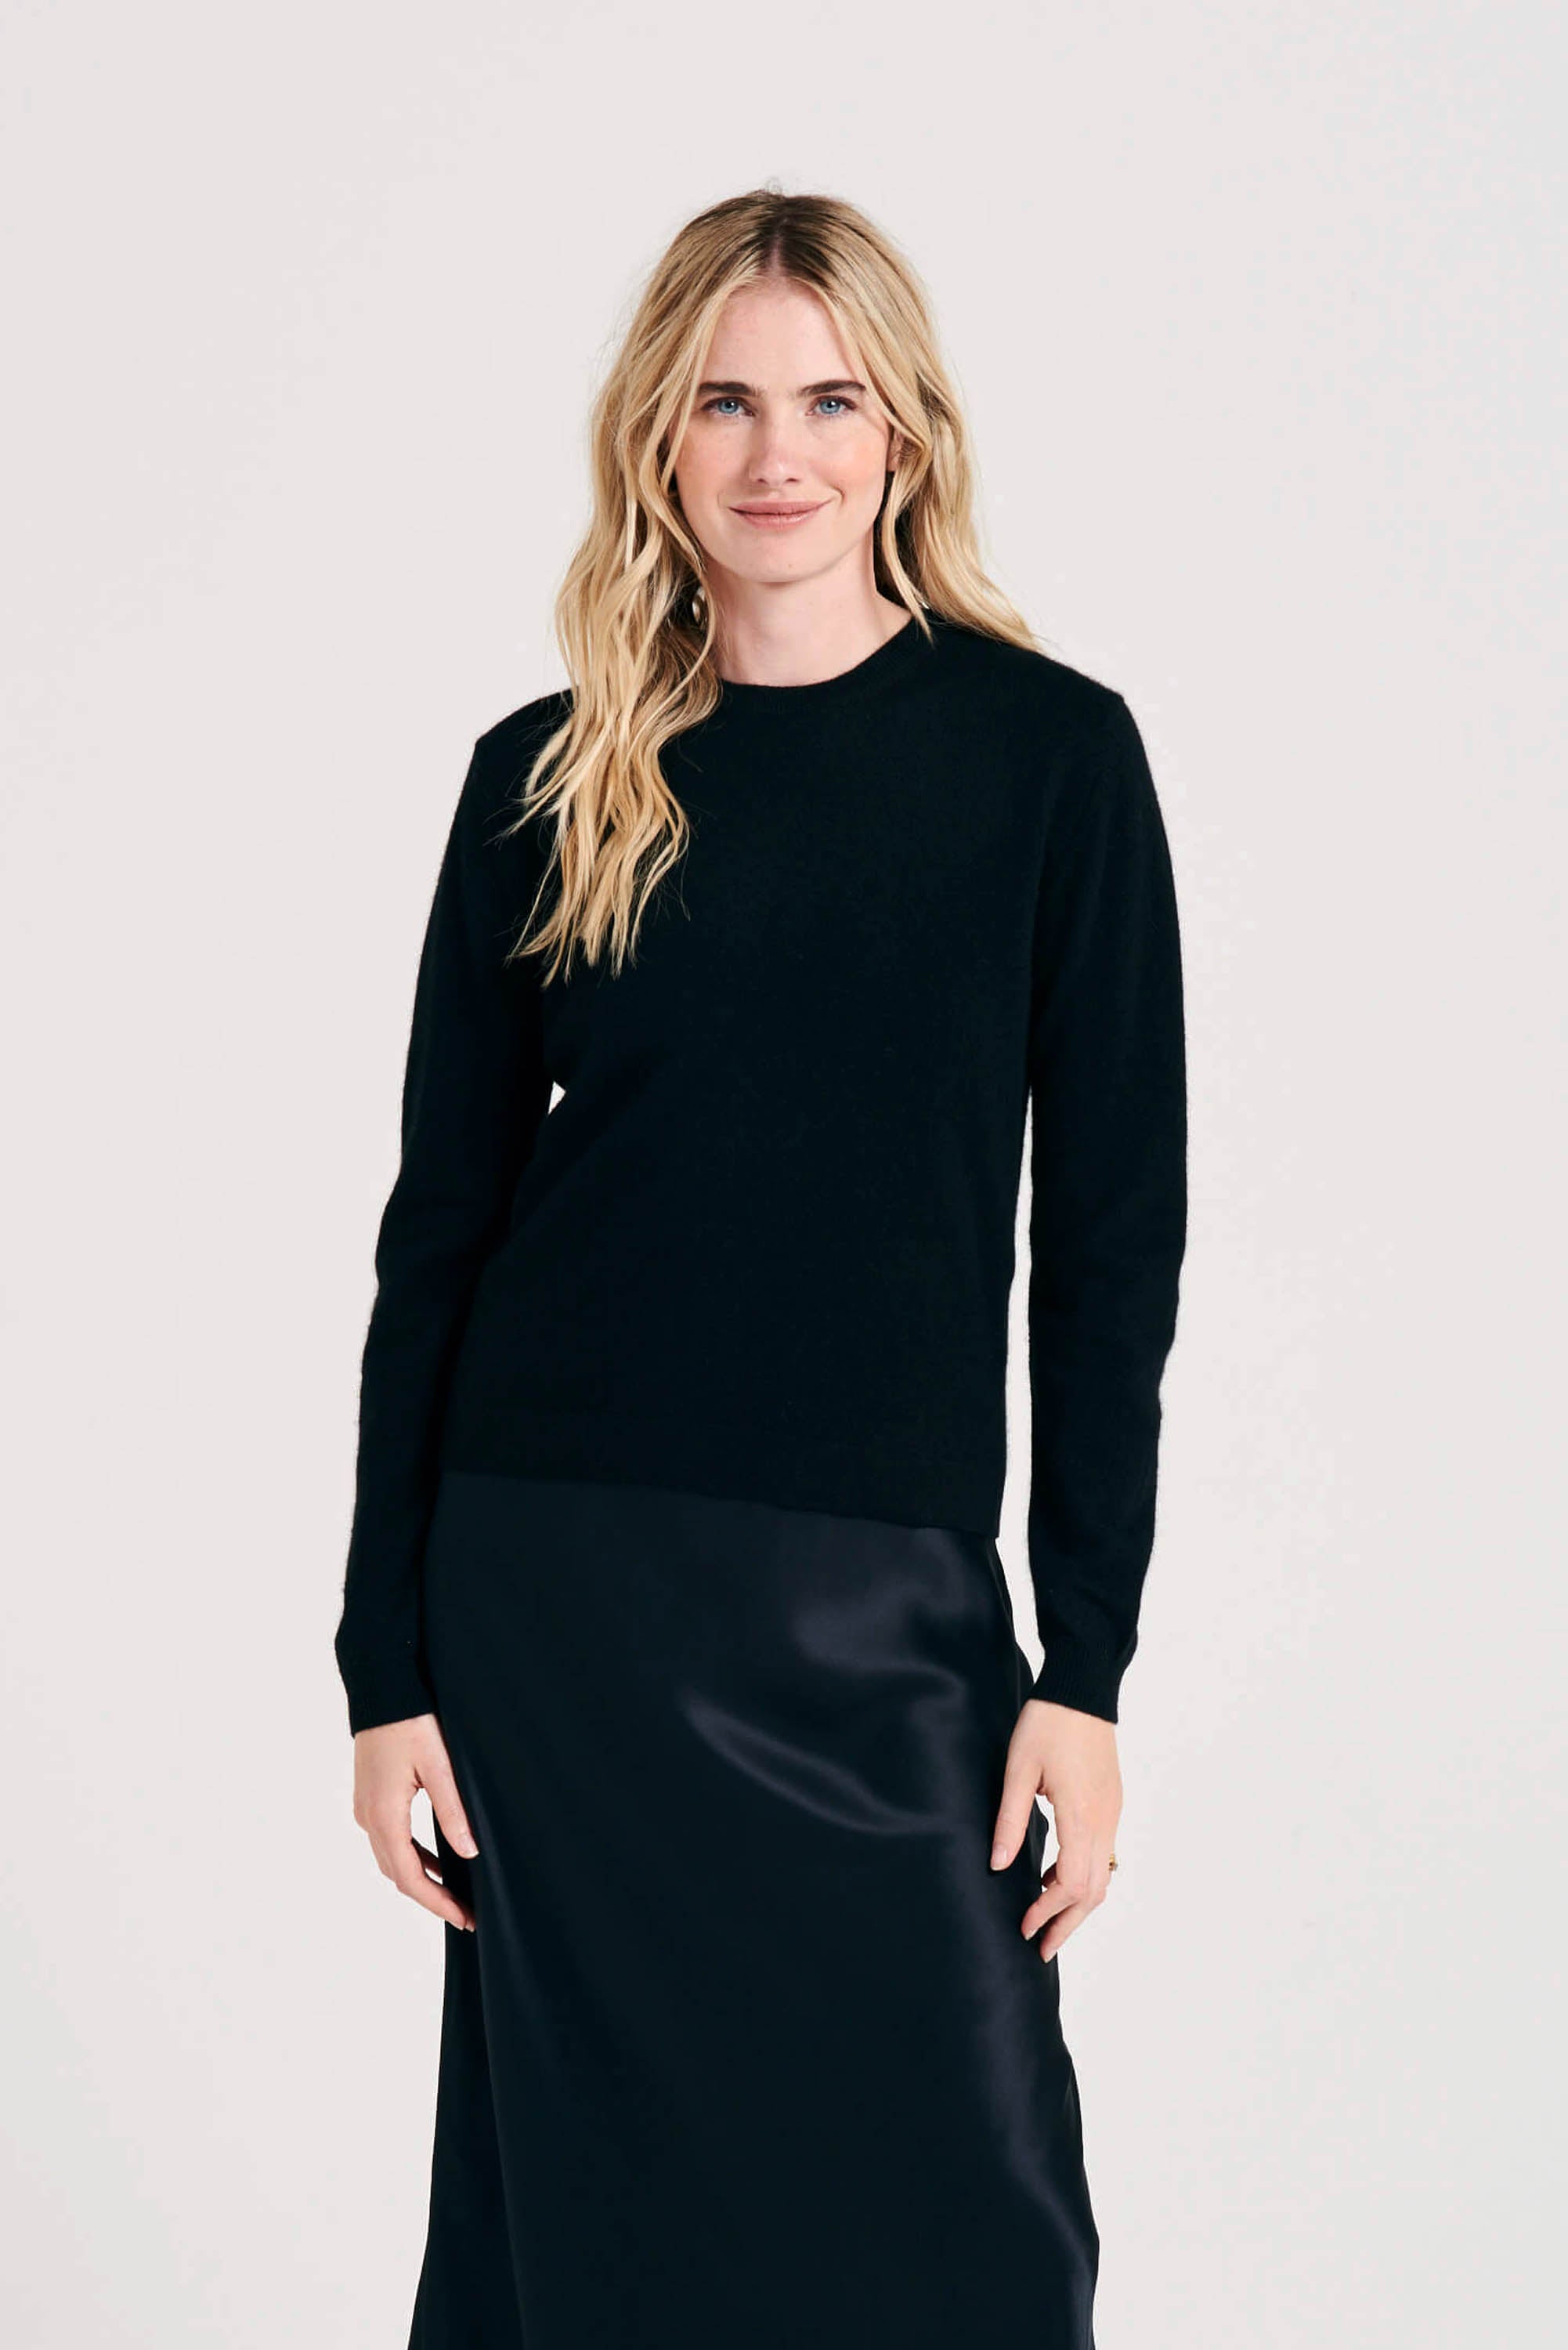 Blonde female model wearing Jumper1234 black cashmere crew neck with mid grey heart patch details on the elbows